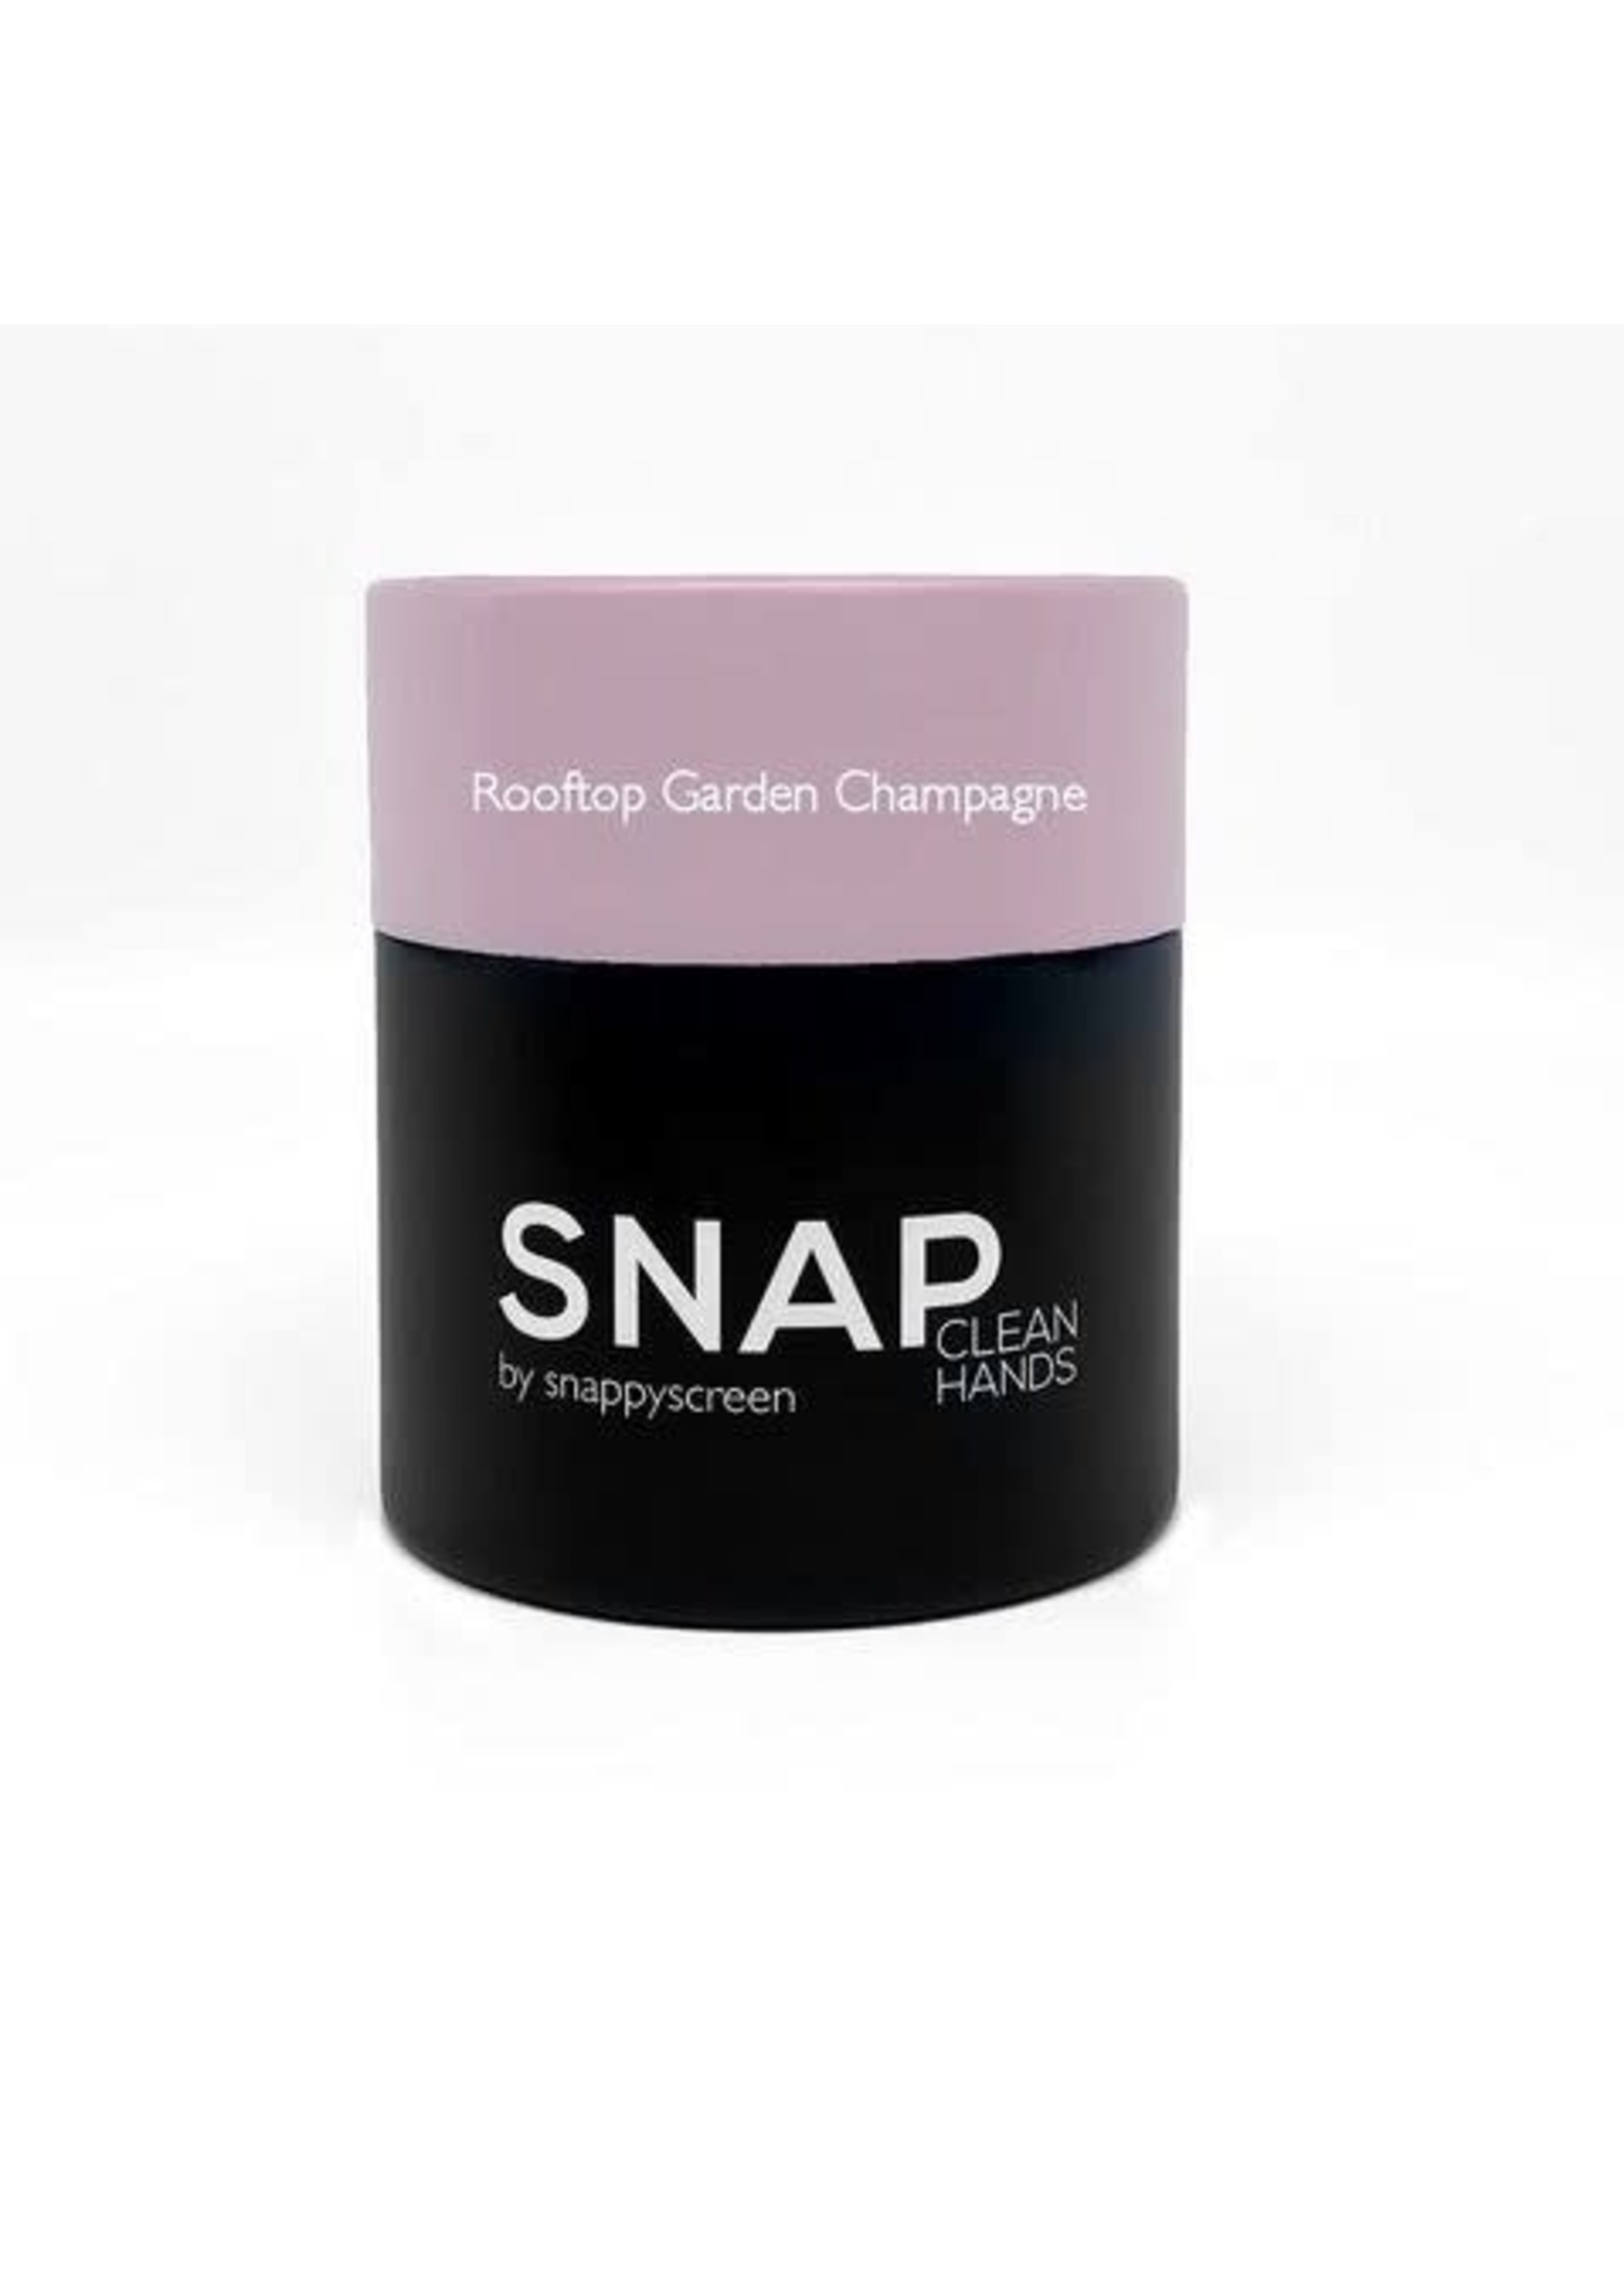 Snappyscreen REFILL for Touchless Mist Sanitizer (PINK) - Rooftop Garden Champagne